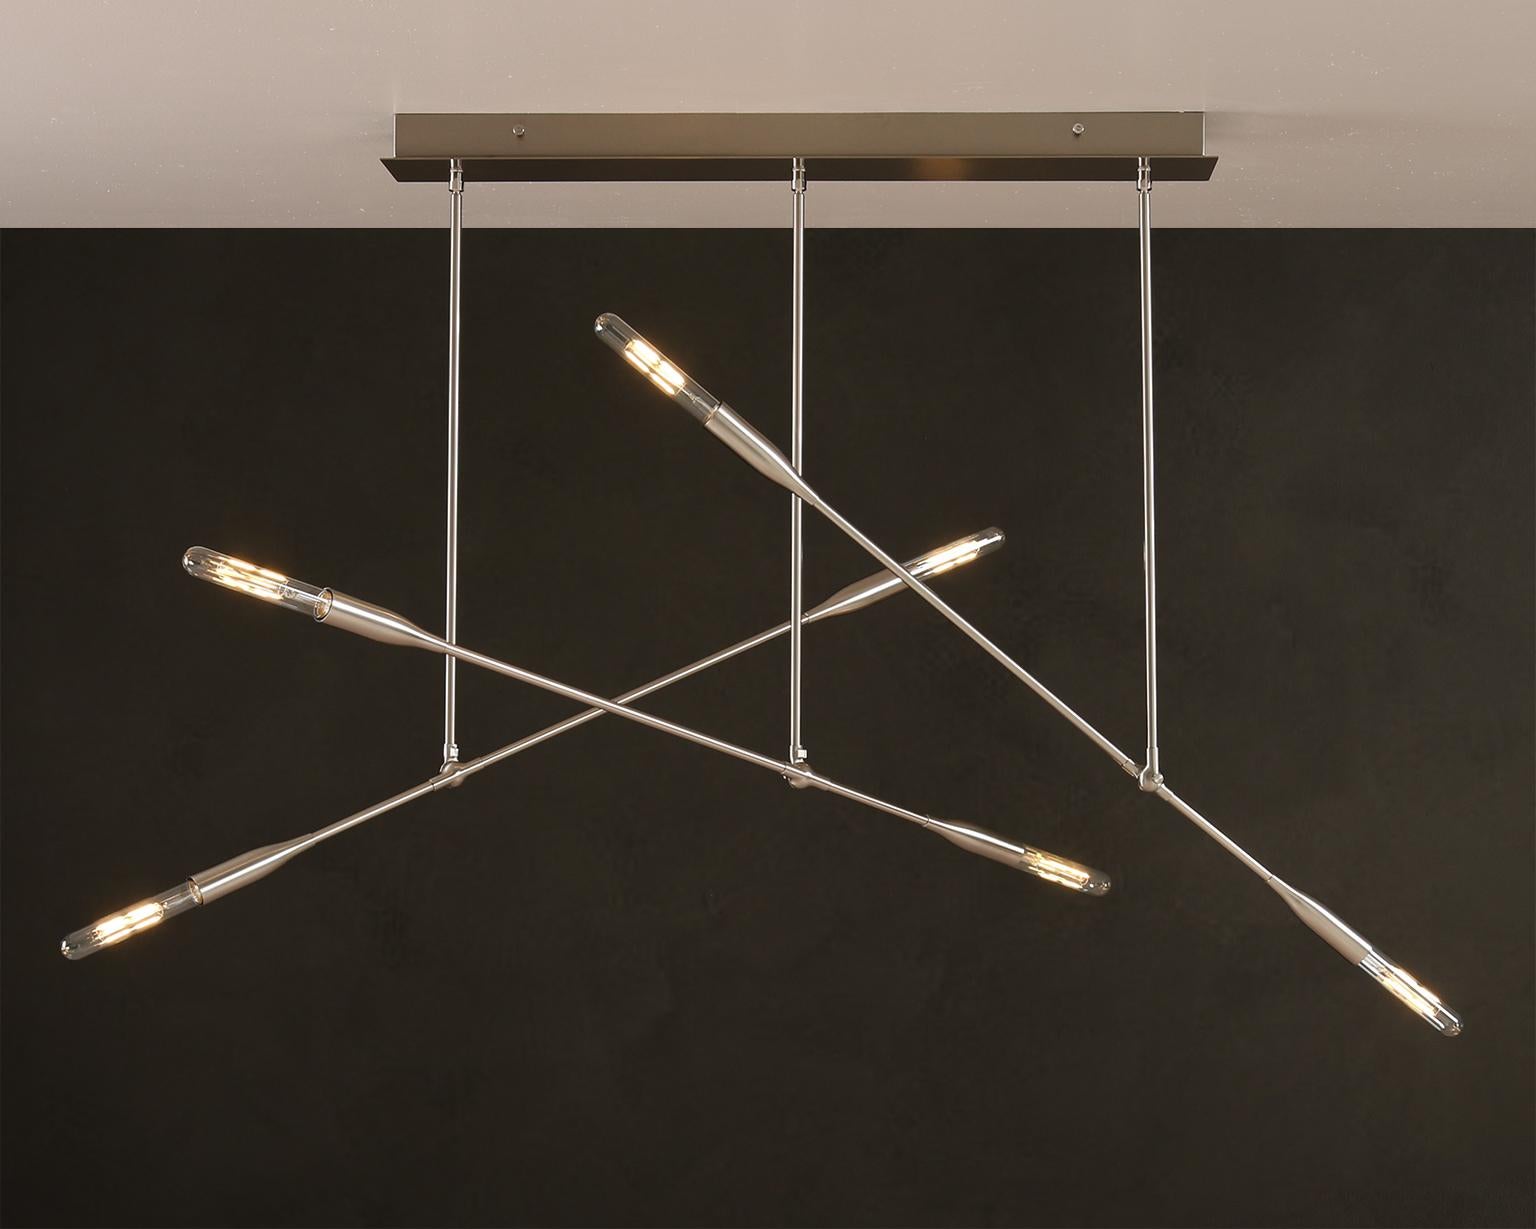 Three Sorenthia lights create dramatic angles on a handcrafted rectangular ceiling canopy. This midcentury-inspired, statement chandelier features exposed bulbs, bold lines, and dramatic negative space. The elegant, reaching arms of each drop can be